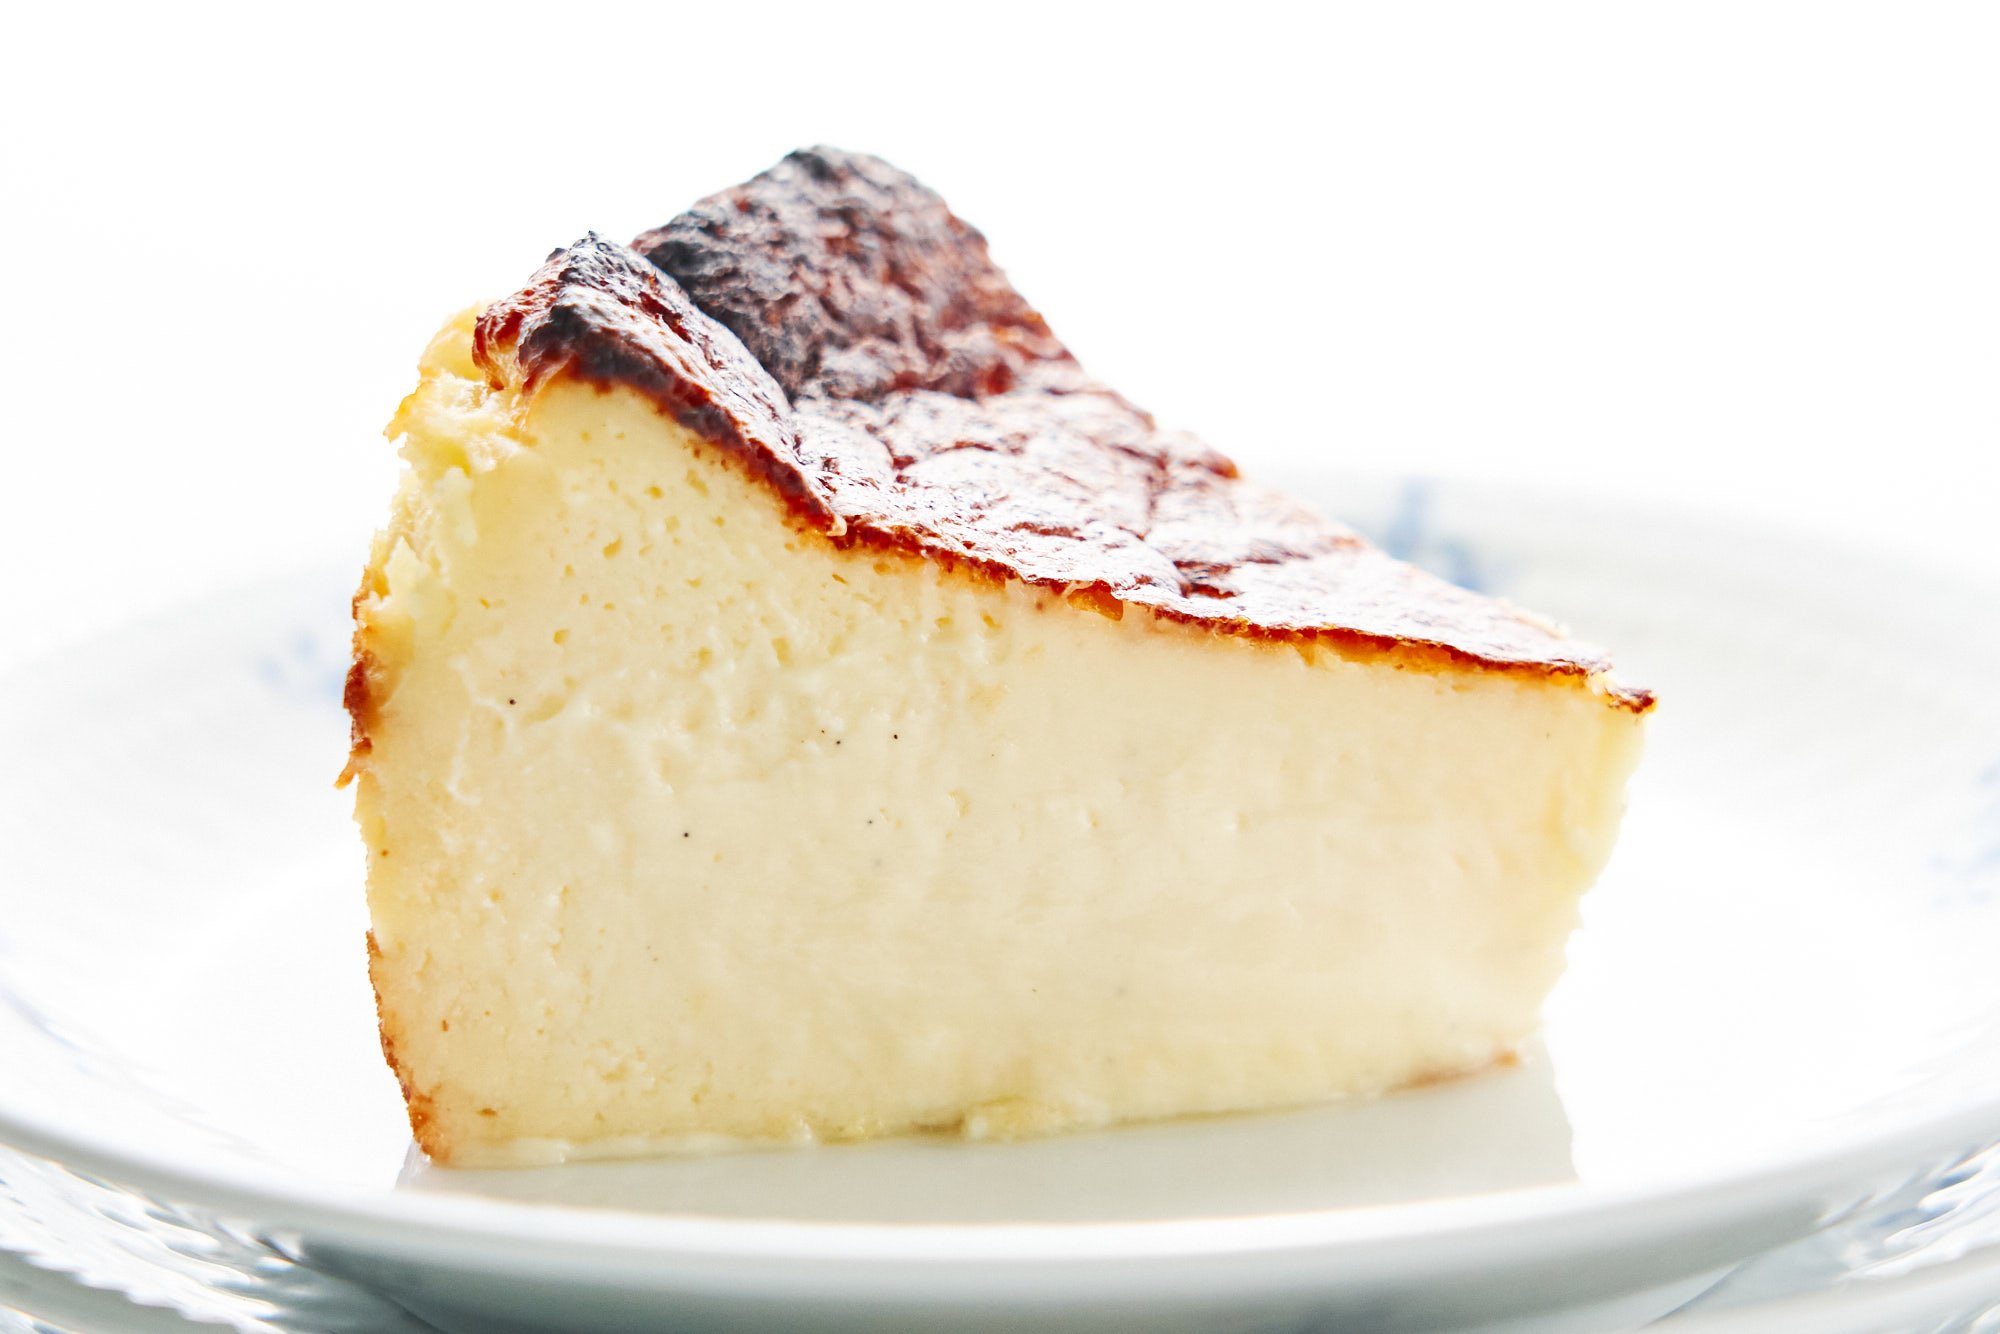 By baking the Basque Cheesecake in a scorching hot oven, the top gets a little burnt while the center remains silky smooth.